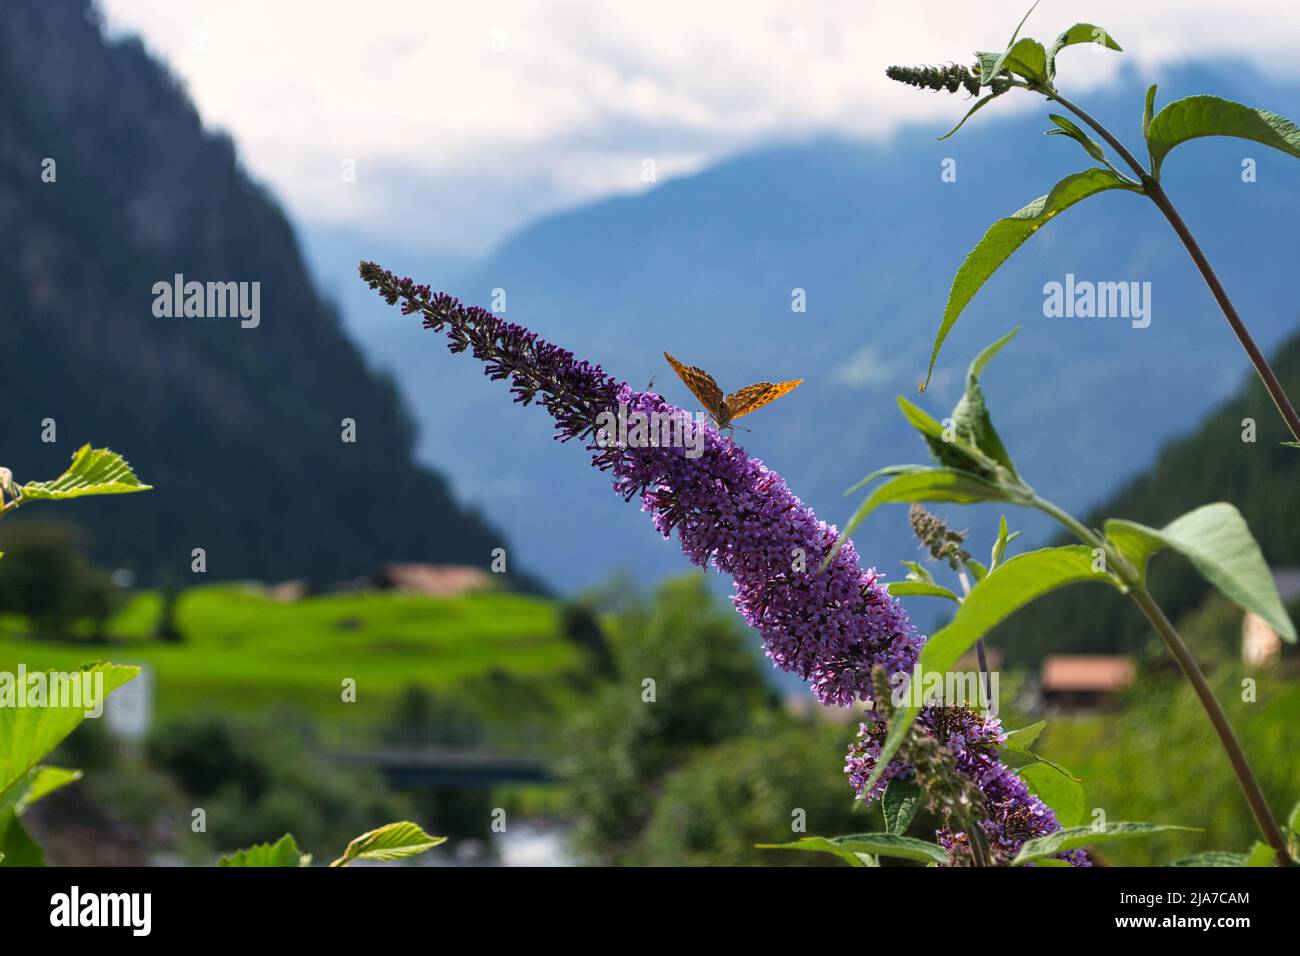 Orange Butterfly on a purple plant in the swiss Alps mountains during a warm summer day. Switzerland Stock Photo